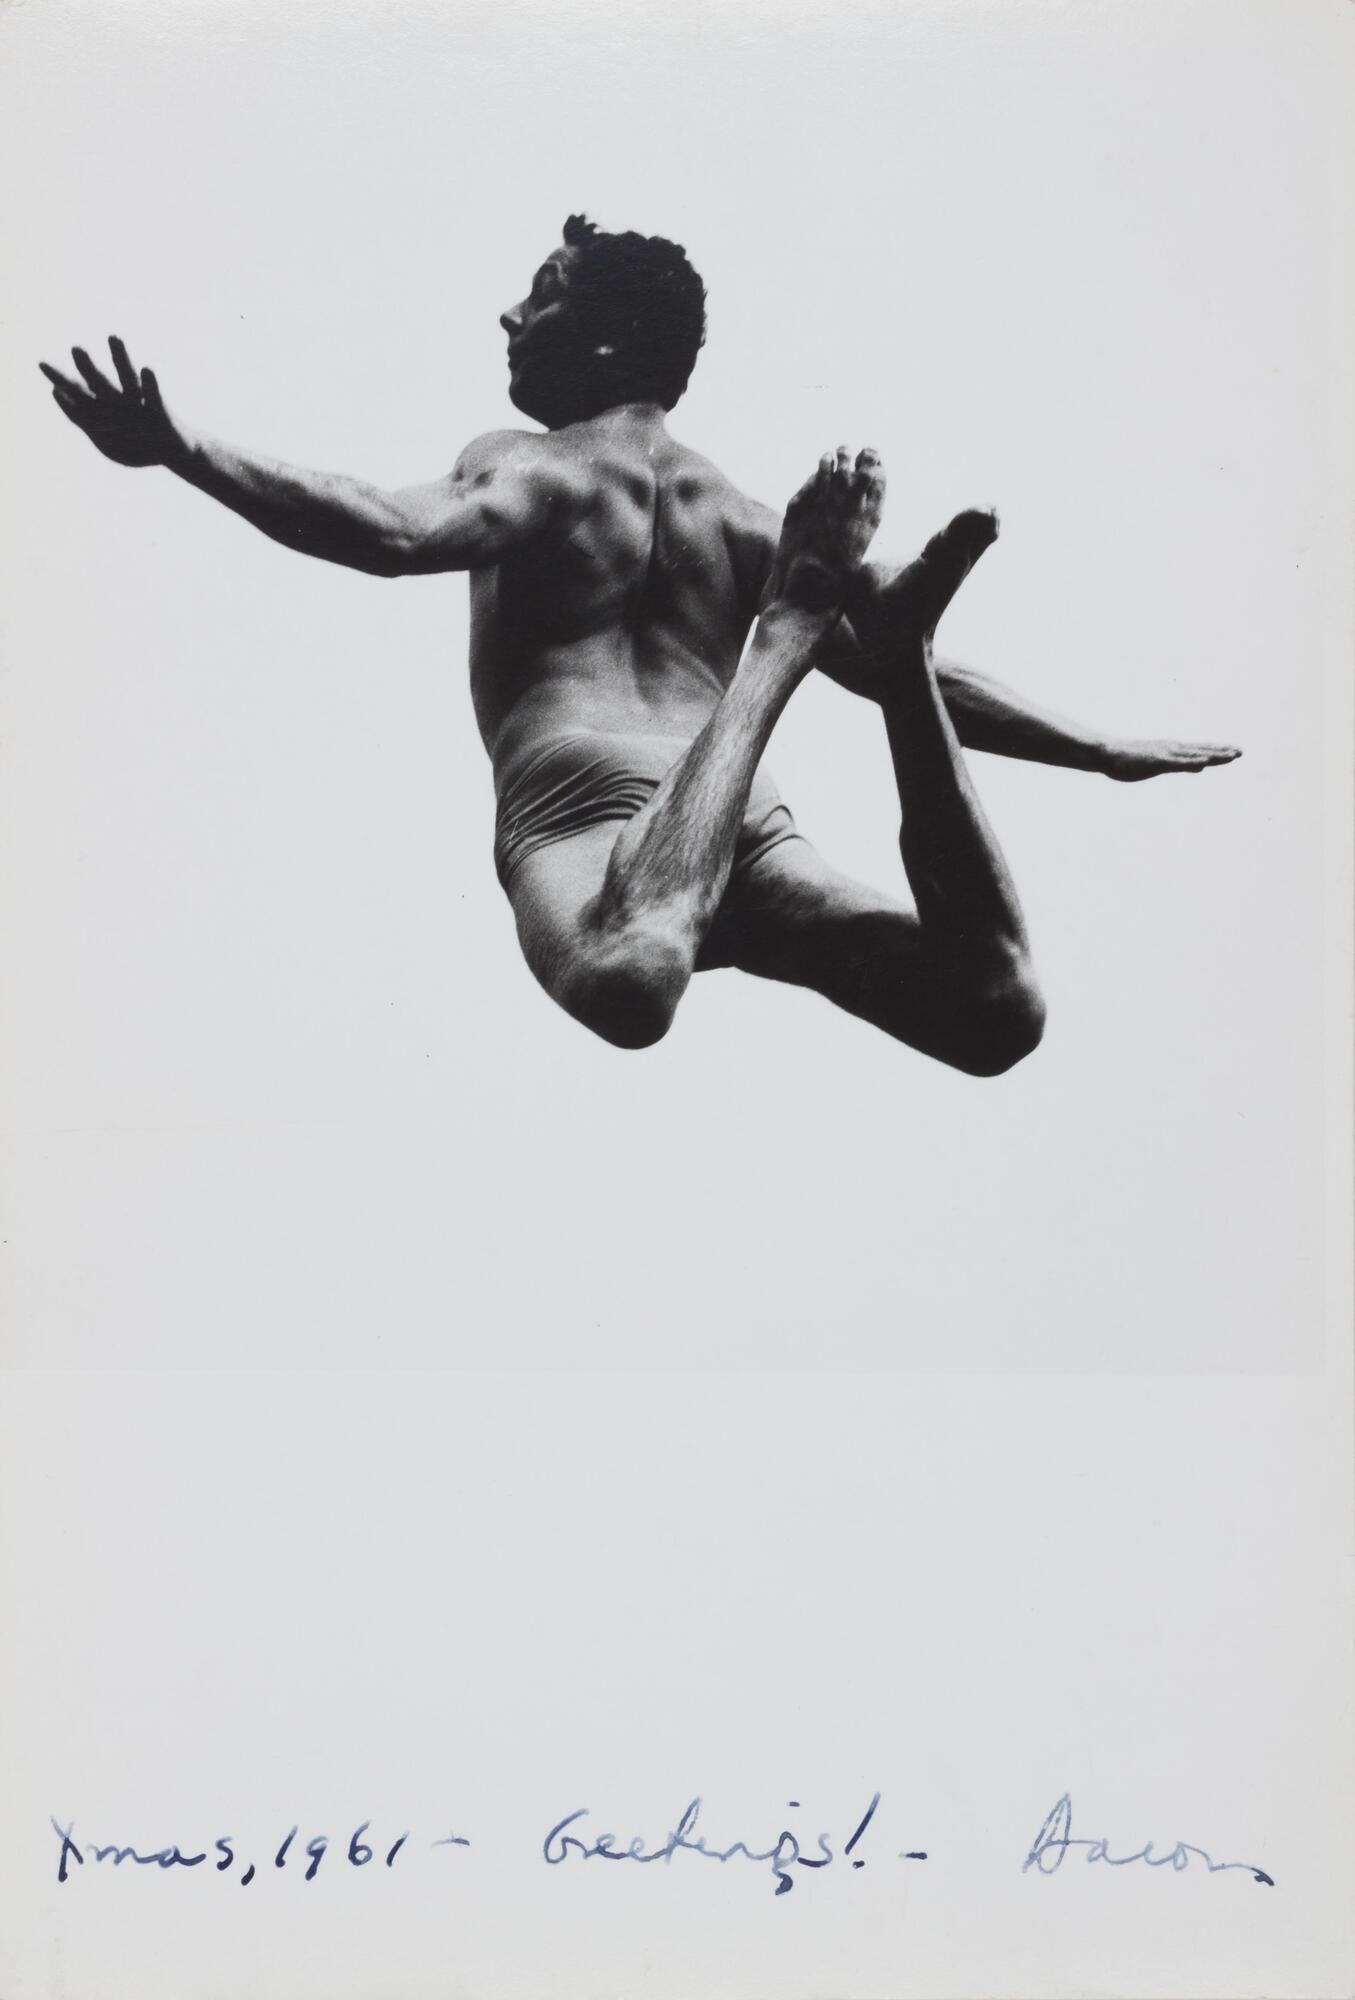 A photograph of a leaping man in mid-air with arms outstretched and legs tucked backward viewed from below.